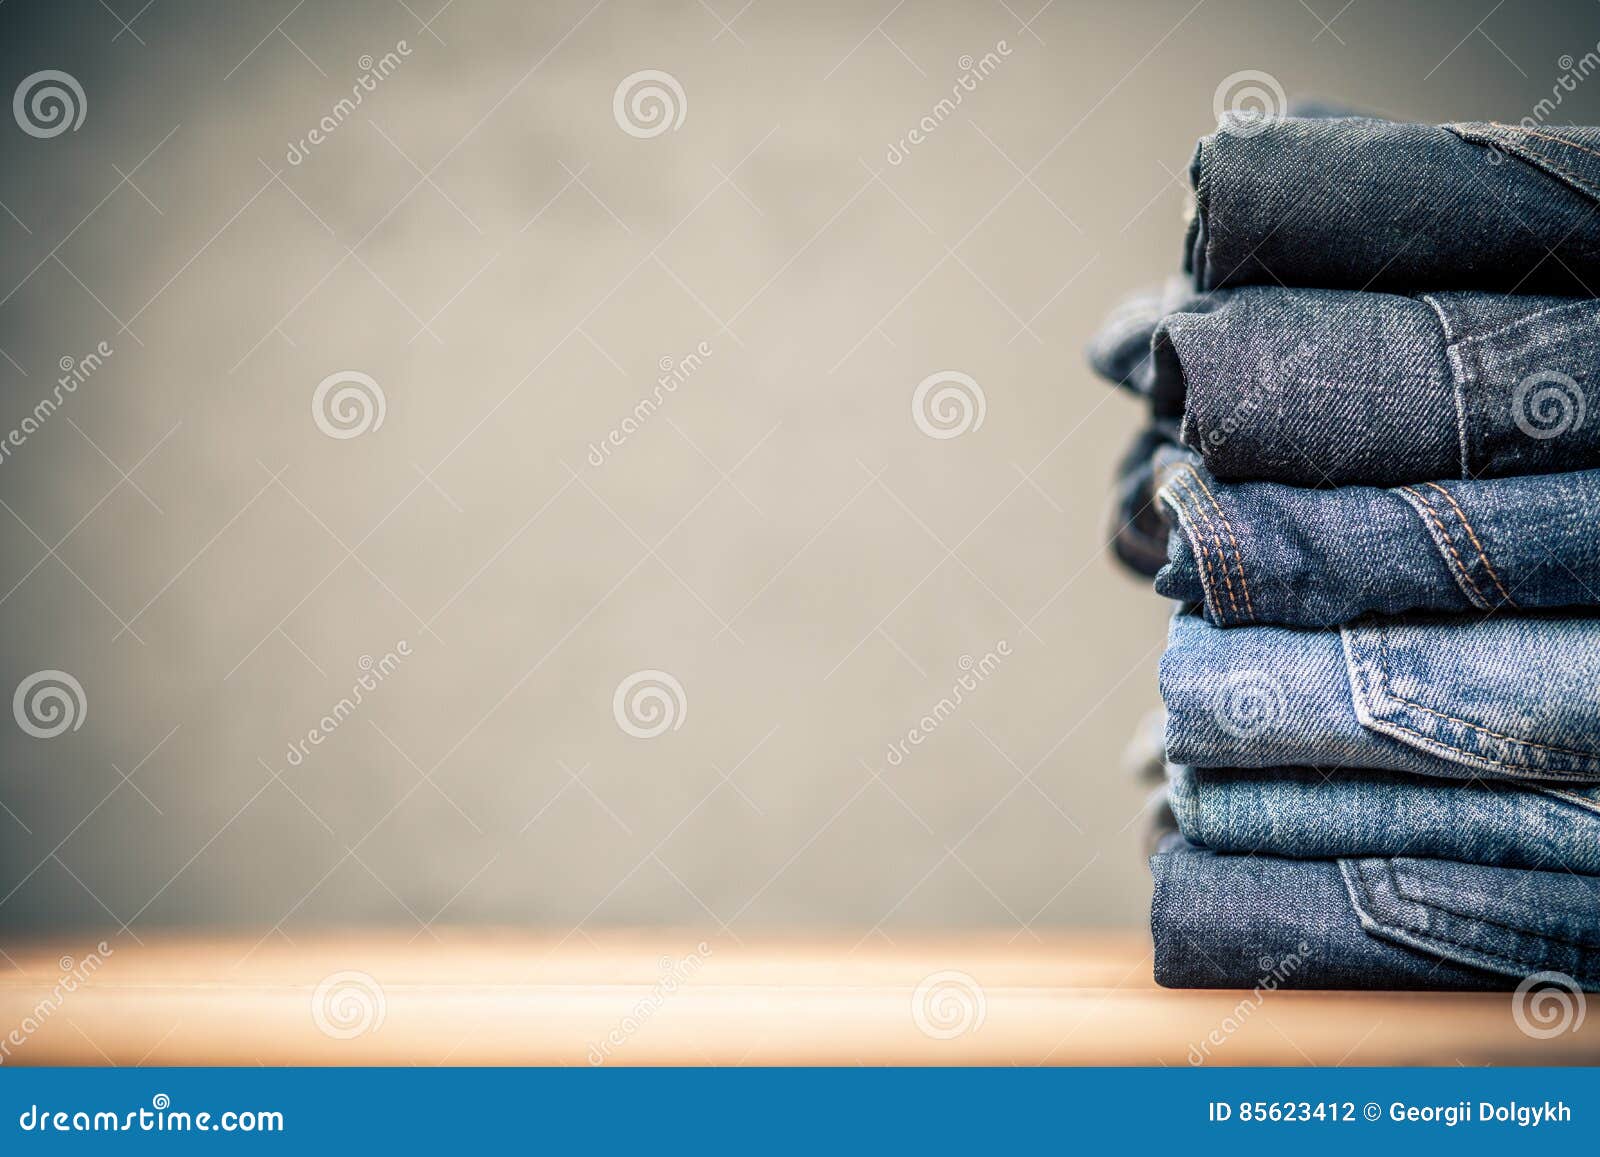 Pile of jeans stock photo. Image of stacked, grunge, cotton - 85623412